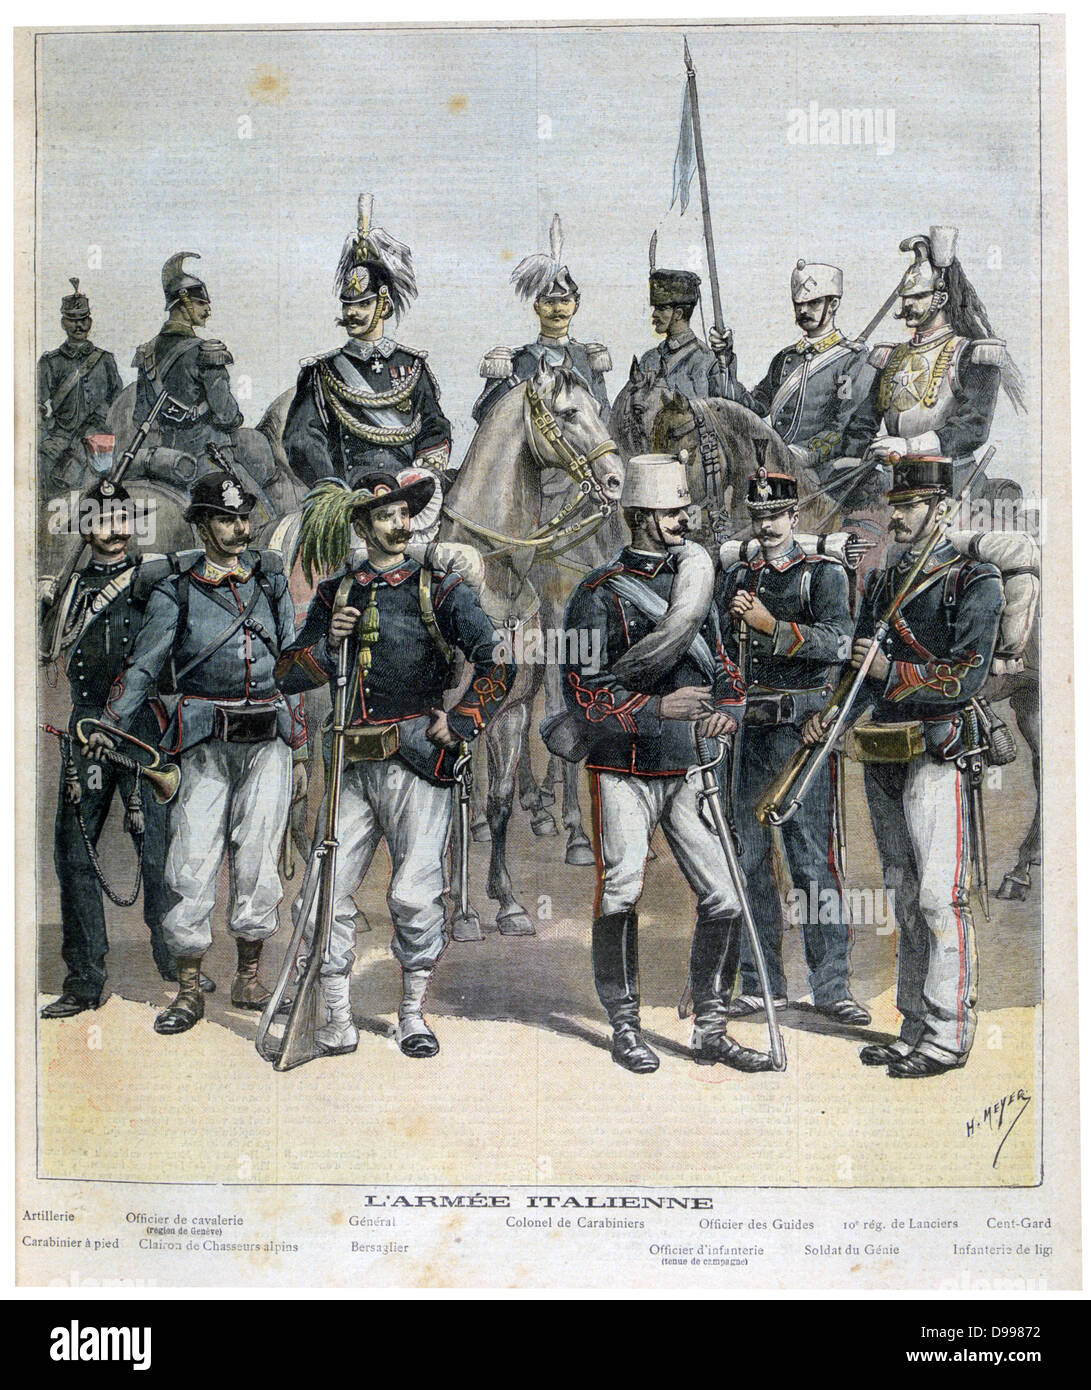 The ranks of the Italian army from General to Infantryman.  From 'Le Petit Journal', Paris 28 May 1892. Military, Soldier Stock Photo